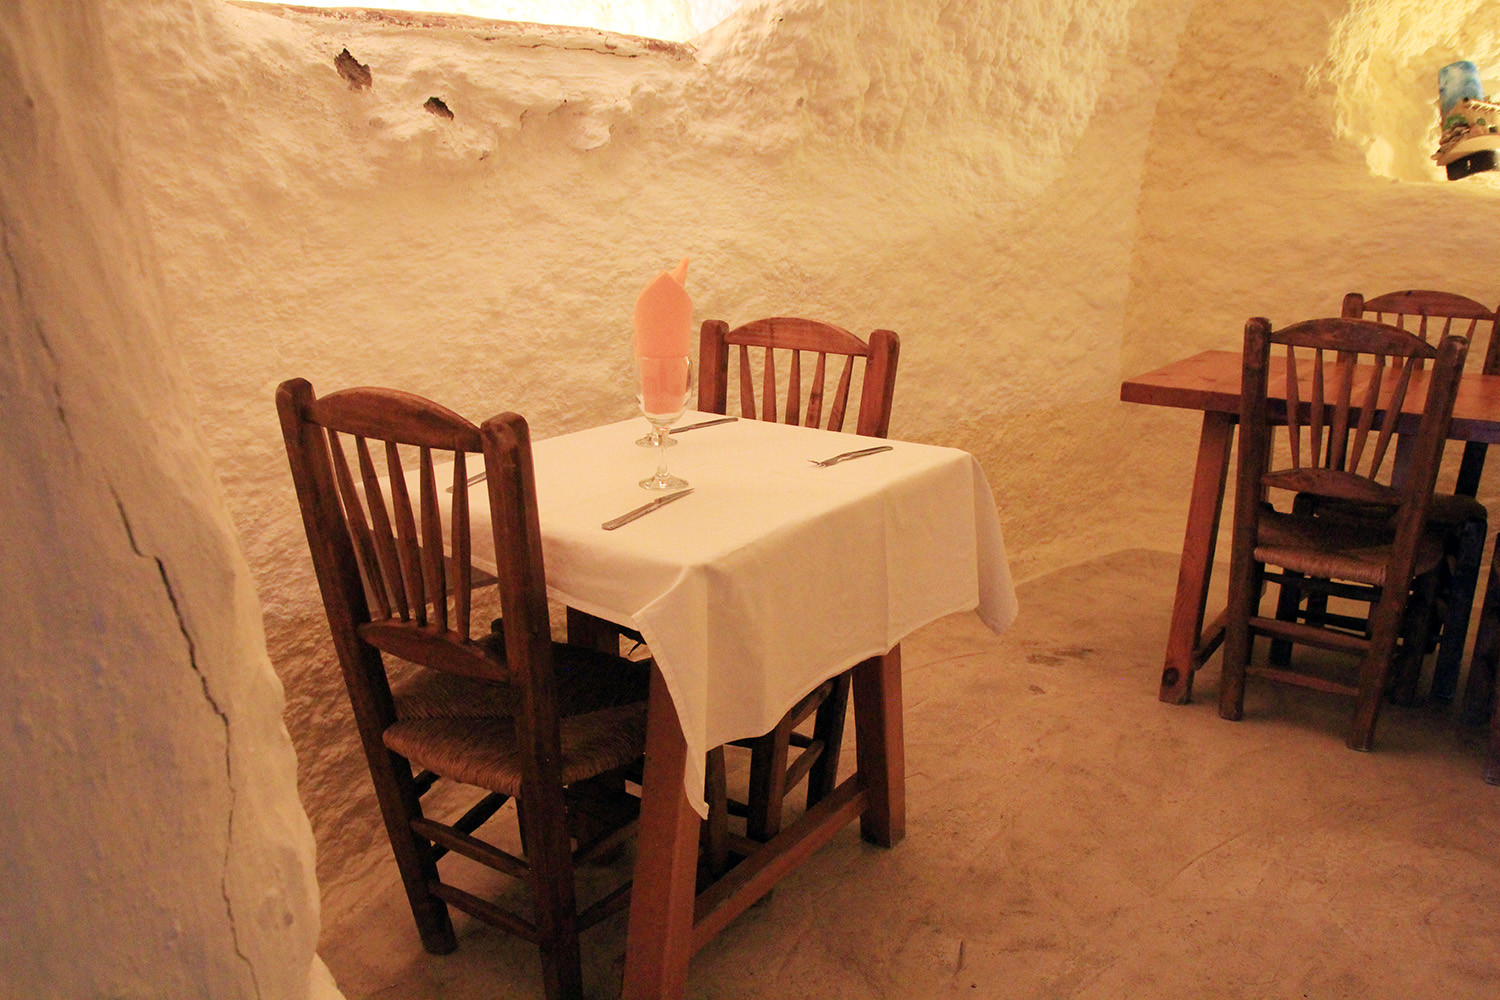 The cave restaurant